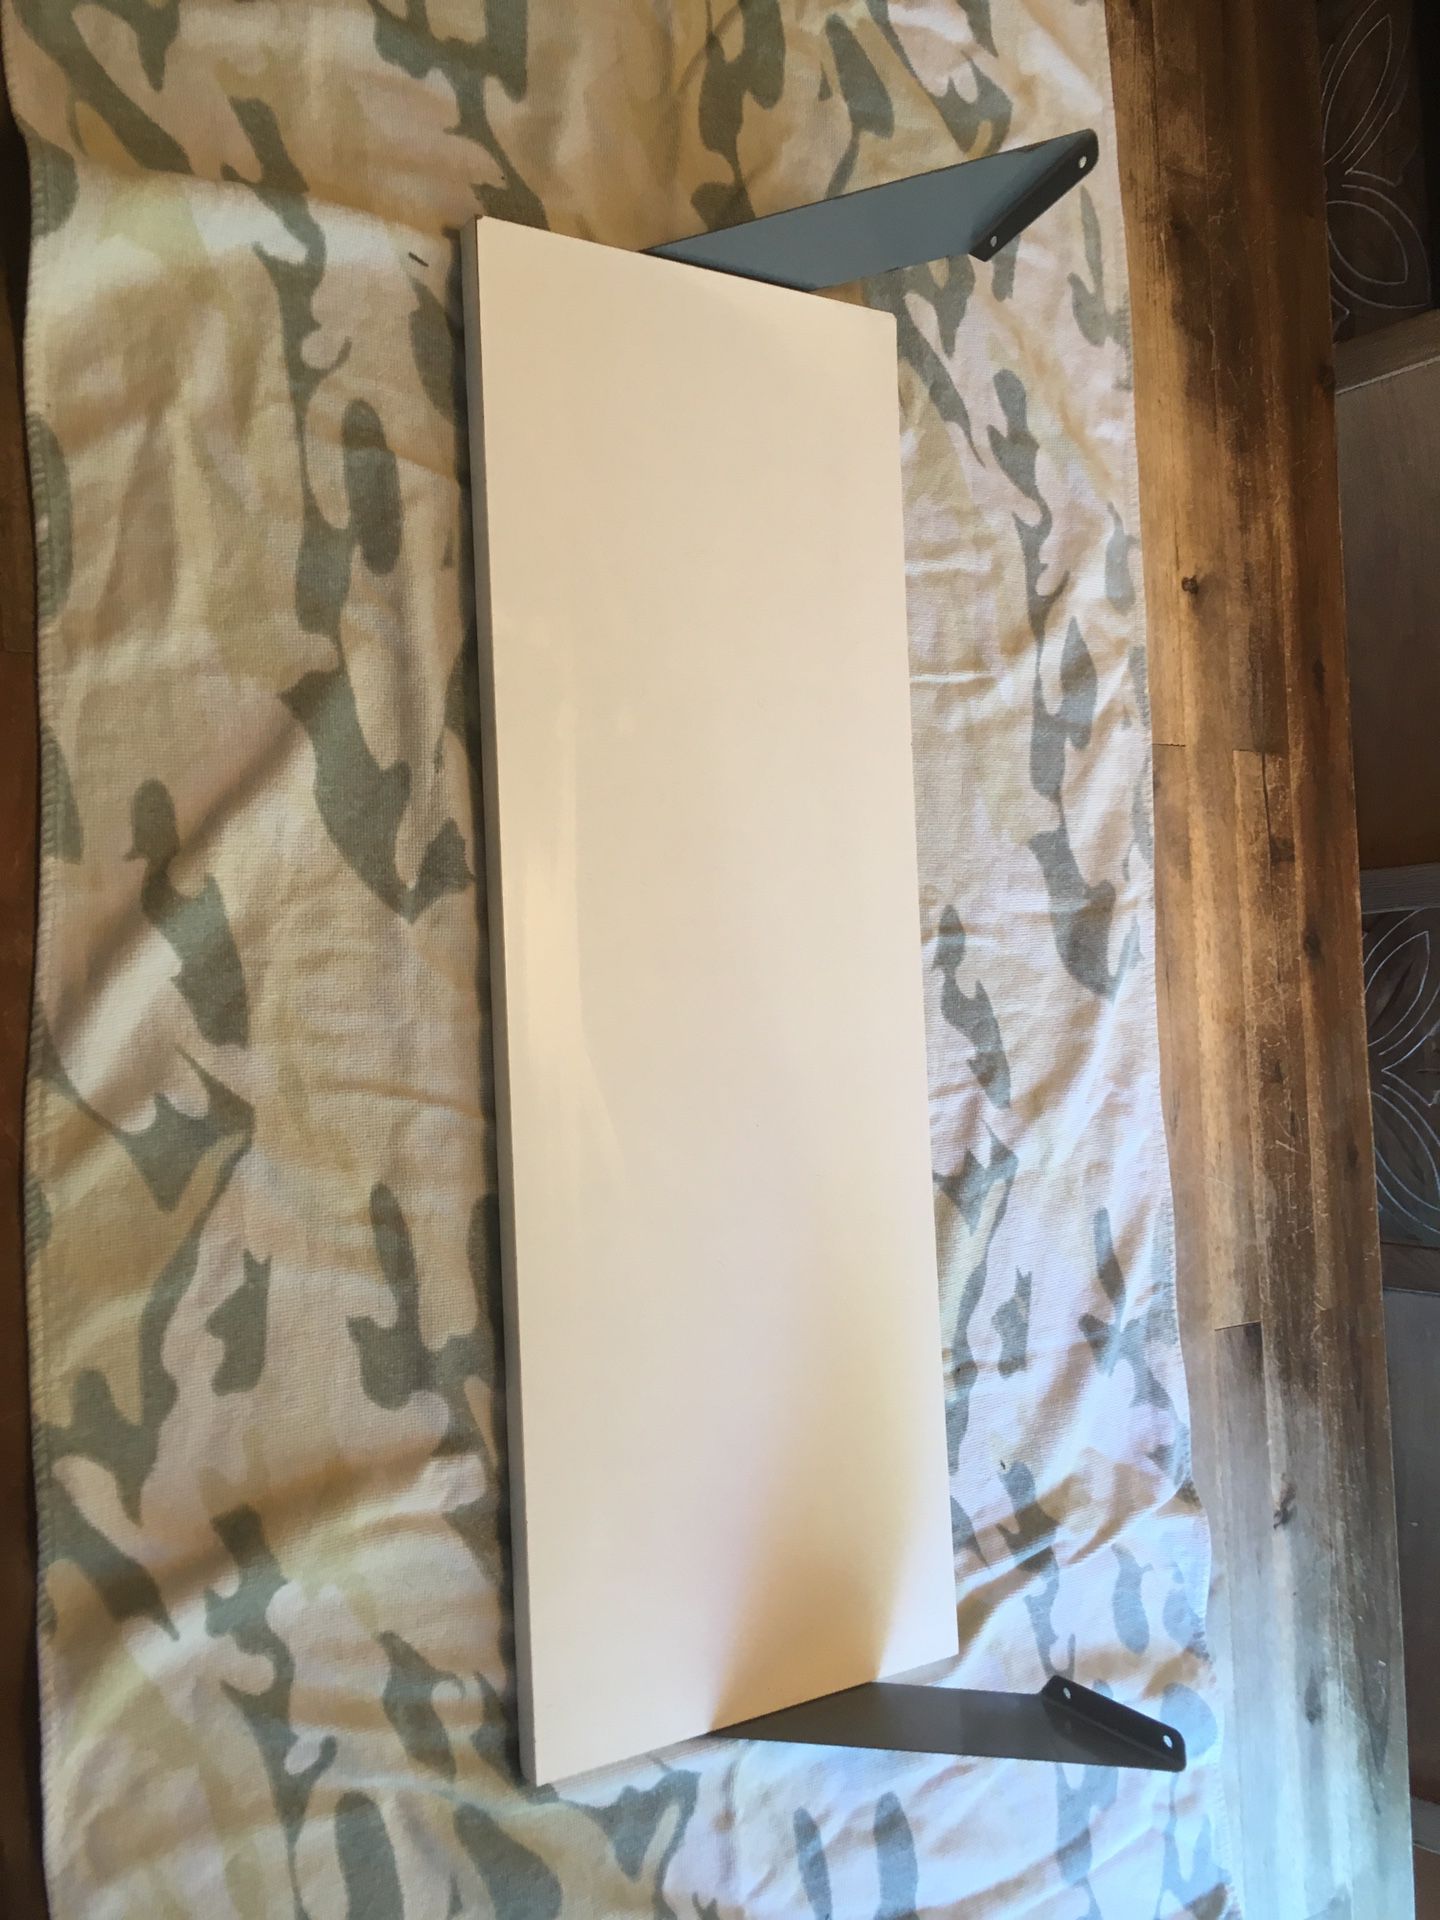 Two wall shelves - White with gray brackets - 27 1/2” x 9 1/2” – Five dollars each